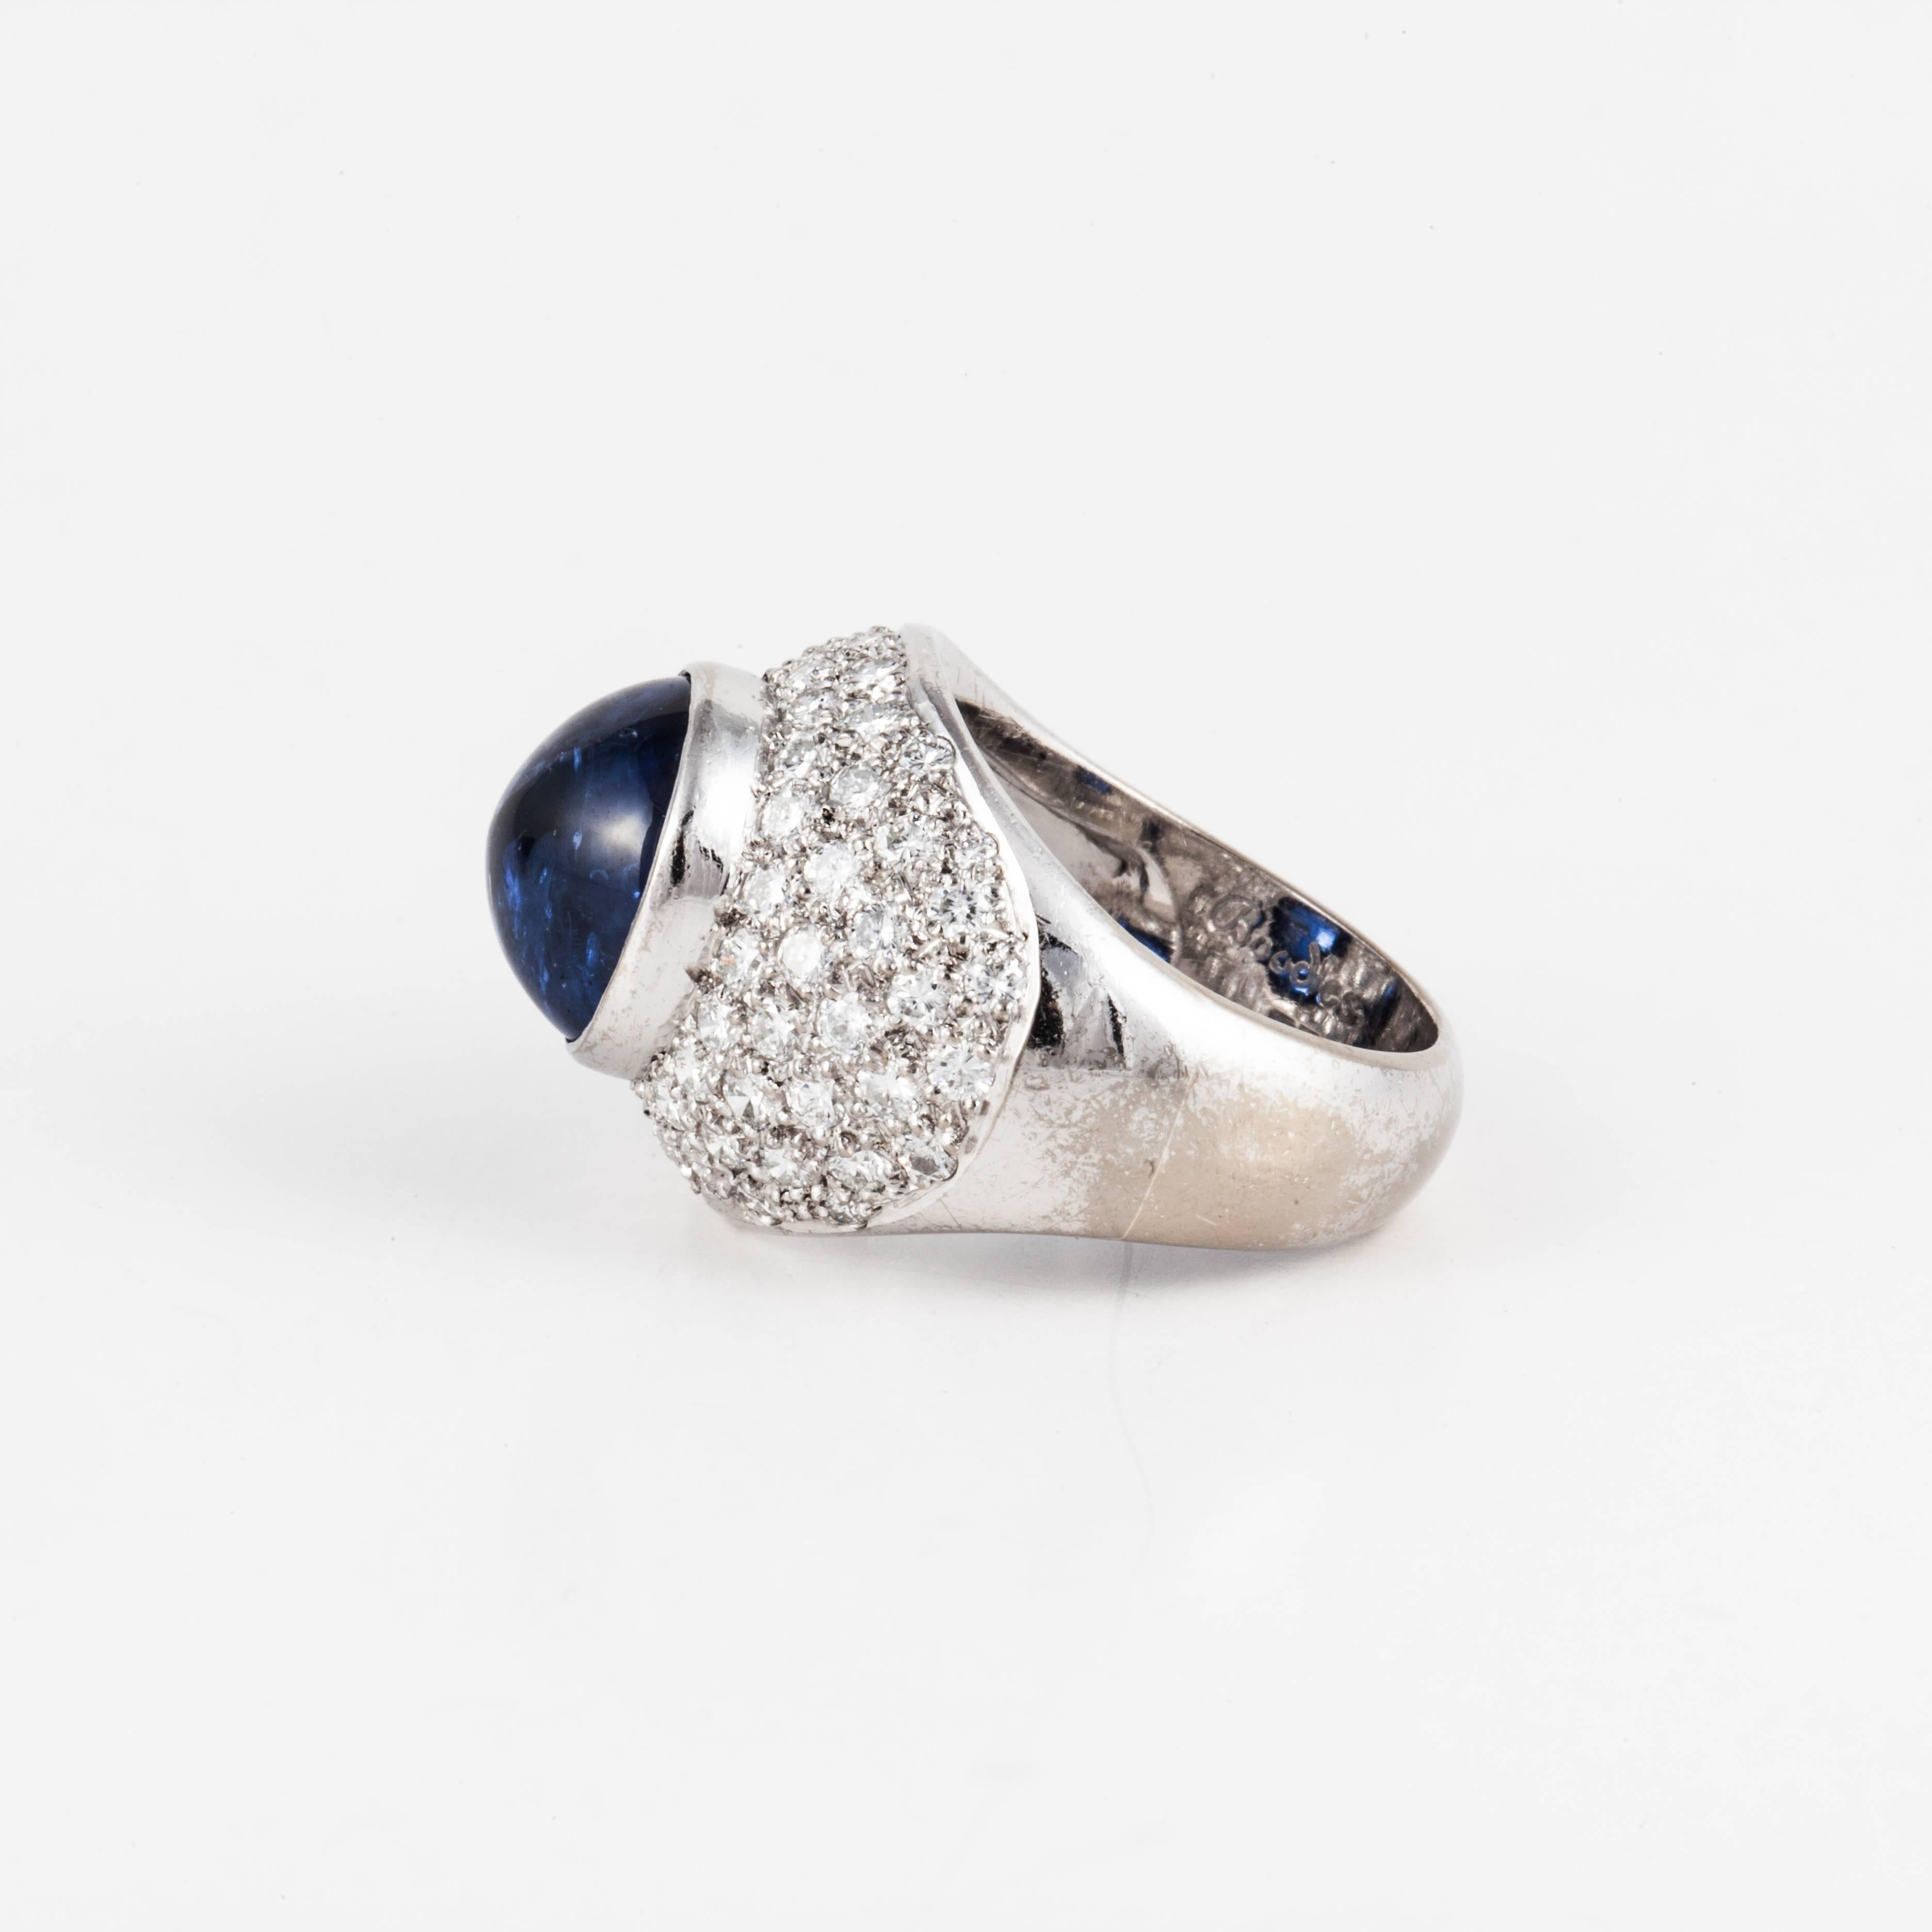 Estate 'Boodles' ring in 18K white gold ring featuring a cabochon blue sapphire with round brilliant-cut diamonds.  There are 72 round diamonds that total 1.50 carats, G-H color and VS clarity.   The cabochon blue sapphire is 8.40 carats.  The